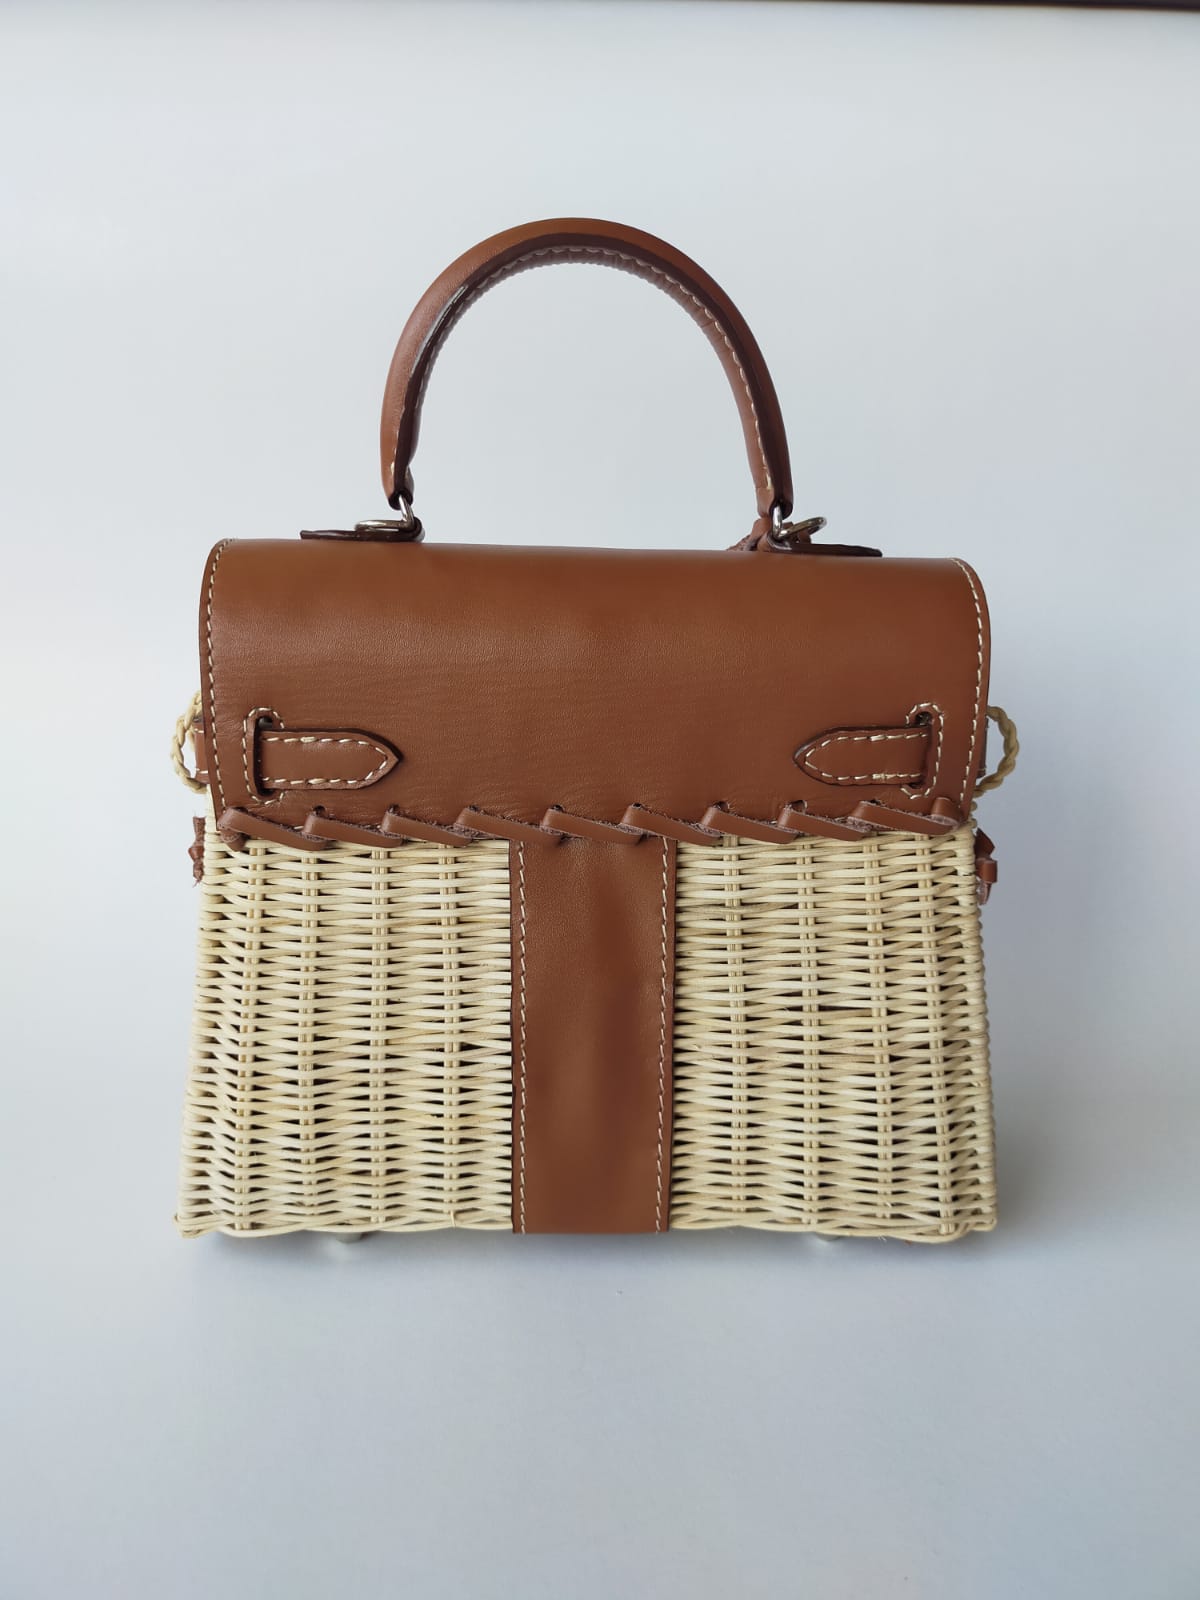 Brown genuine leather - Handmade wicker bag, Small size (25cm)